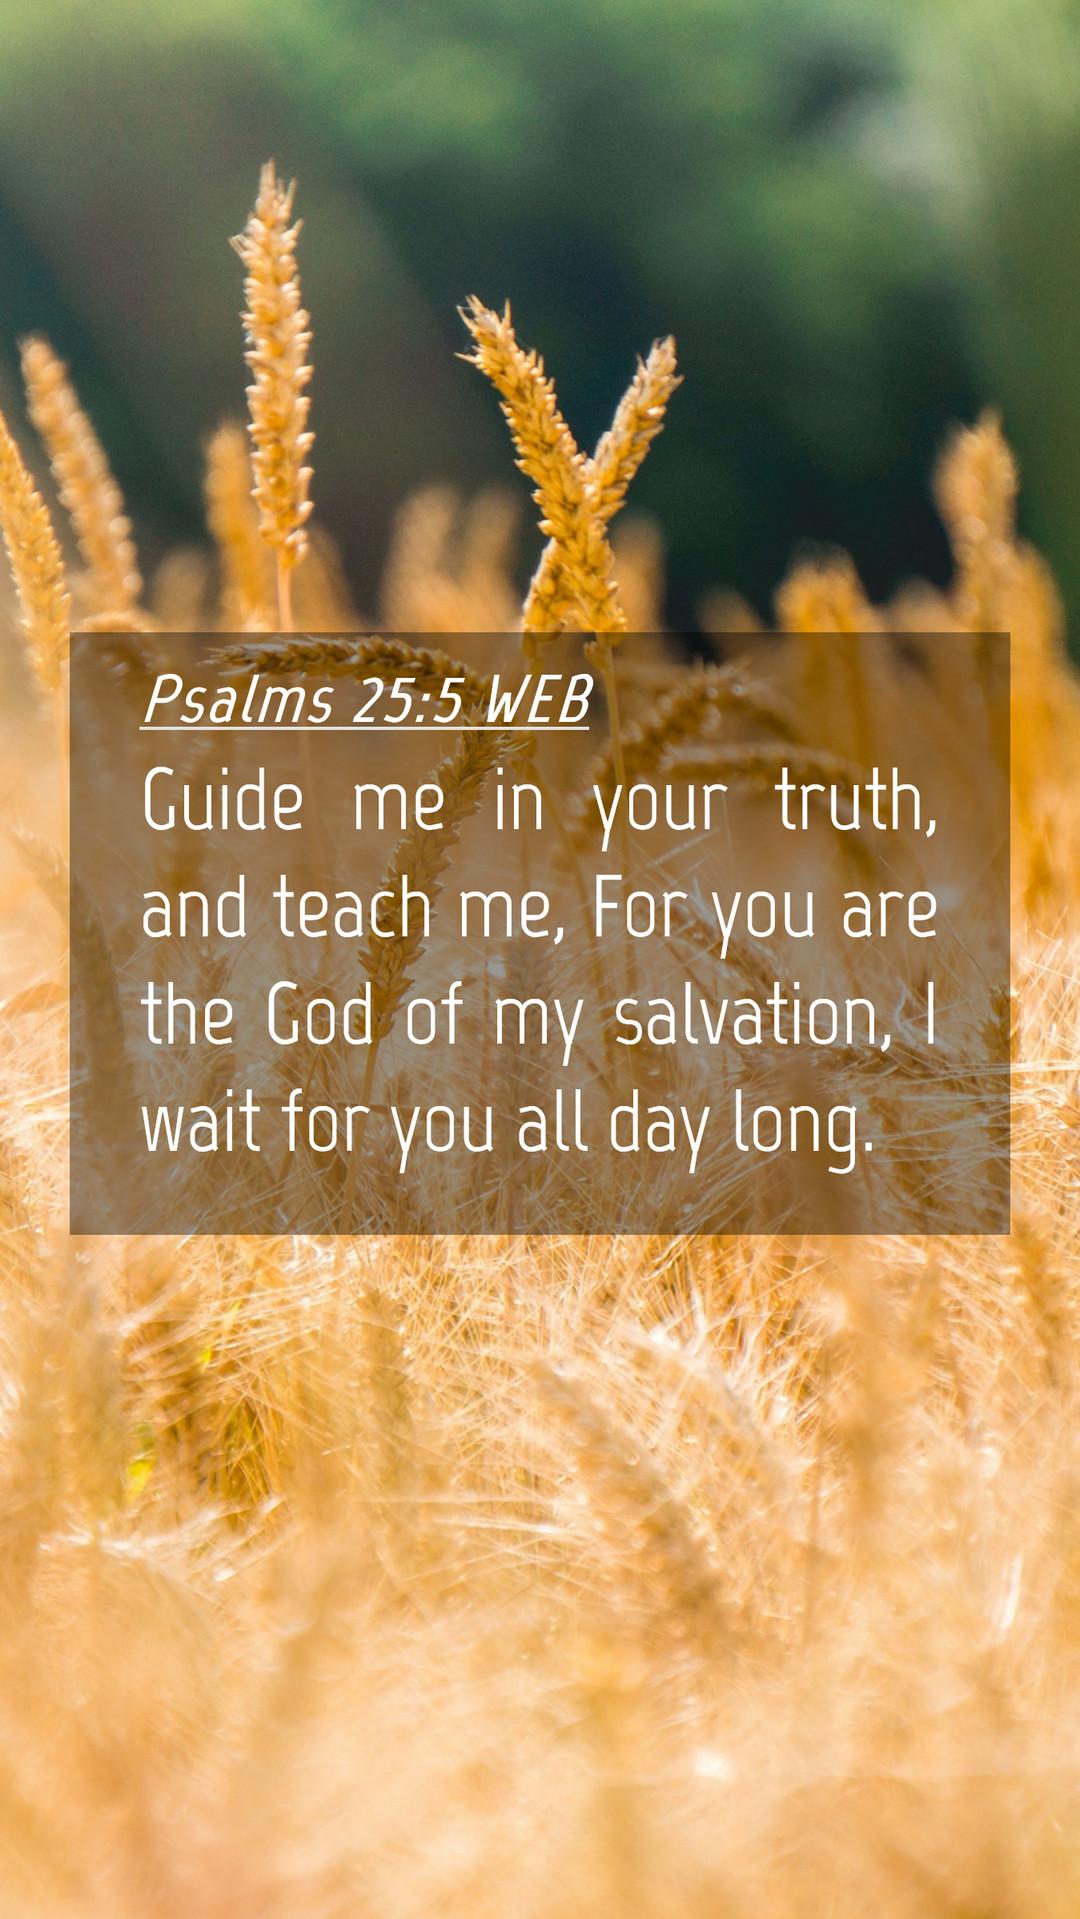 Psalms 255 WEB Mobile Phone Wallpaper   Guide me in your truth